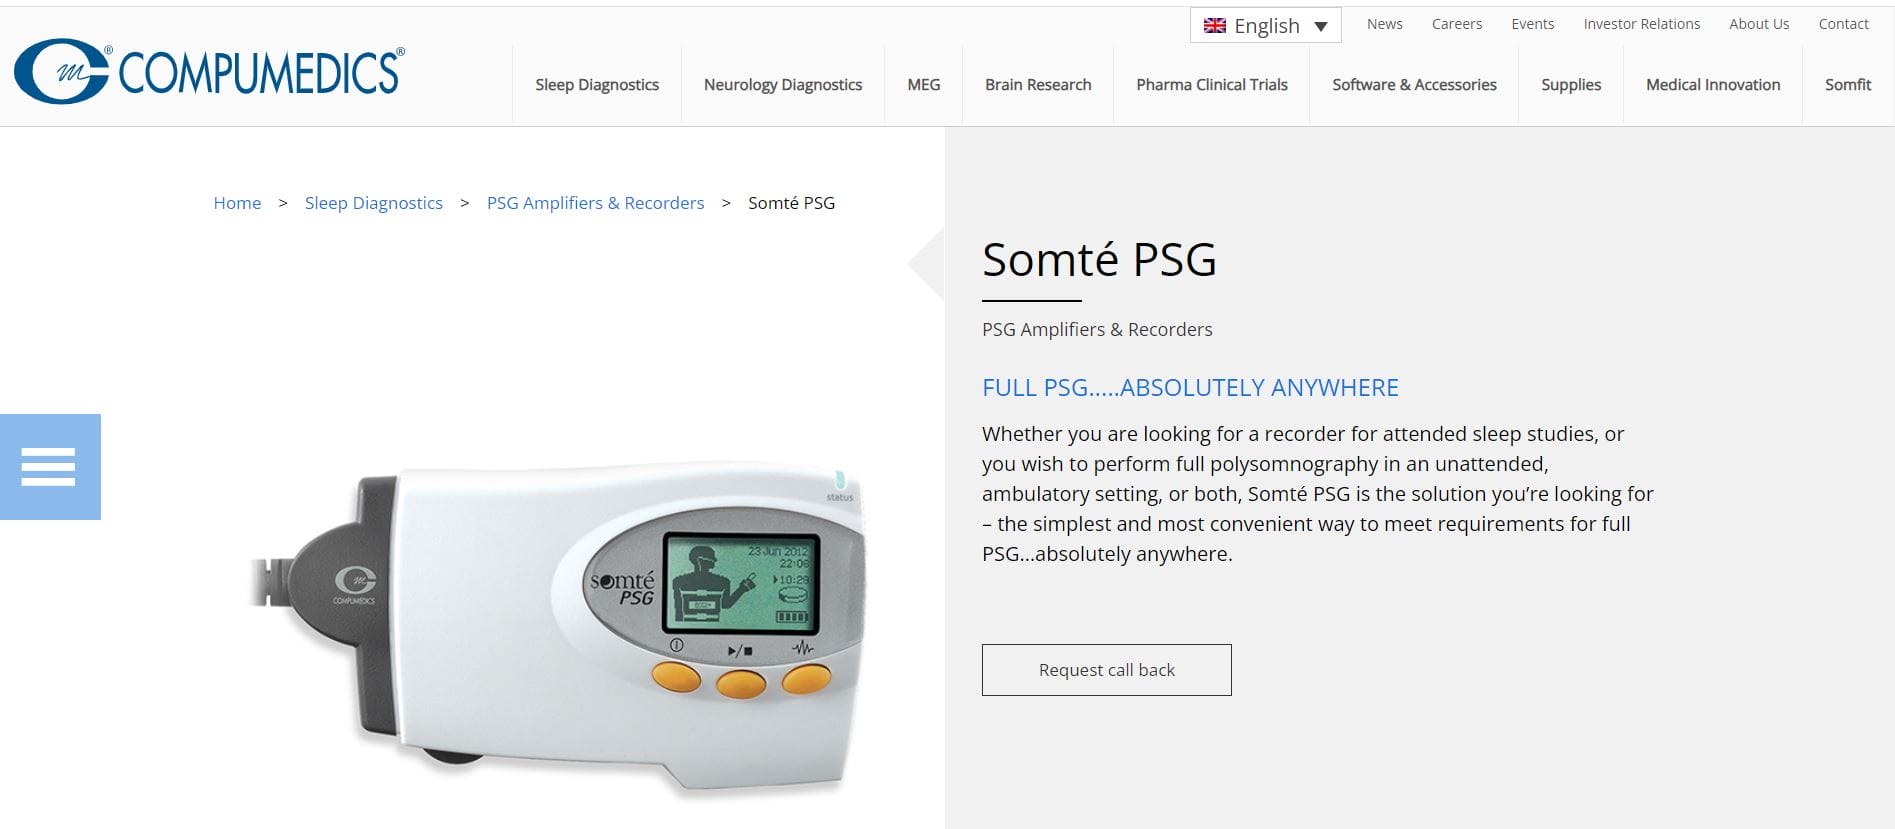 A Somté PSG amplifier and recorder for sleep studies, displaying information on its small screen, set against a plain background with the company's website interface visible.